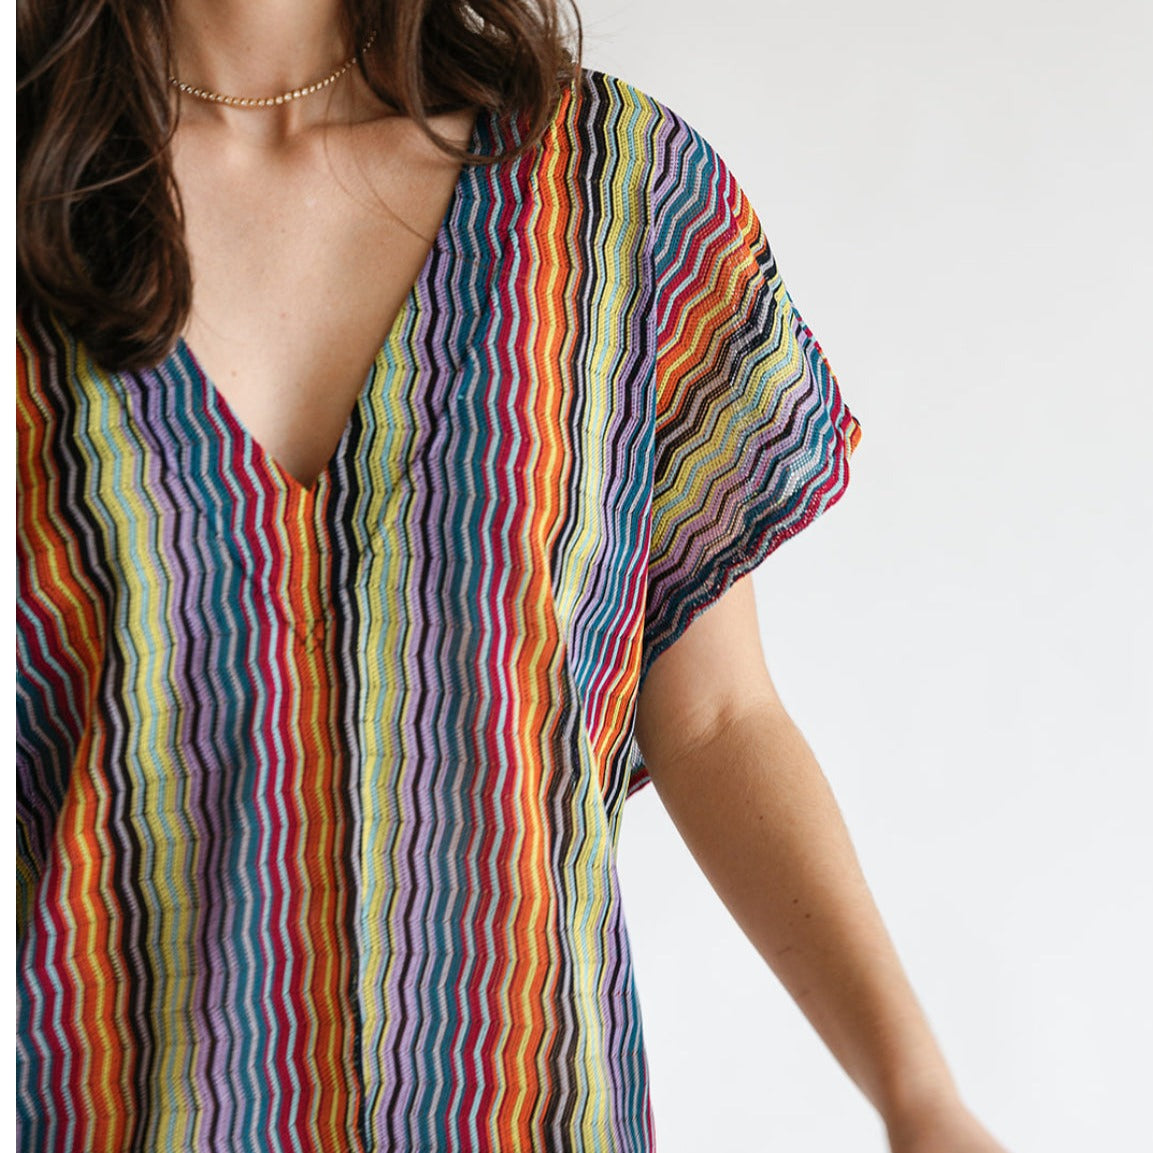 the JEWEL coverup in colorful pattern